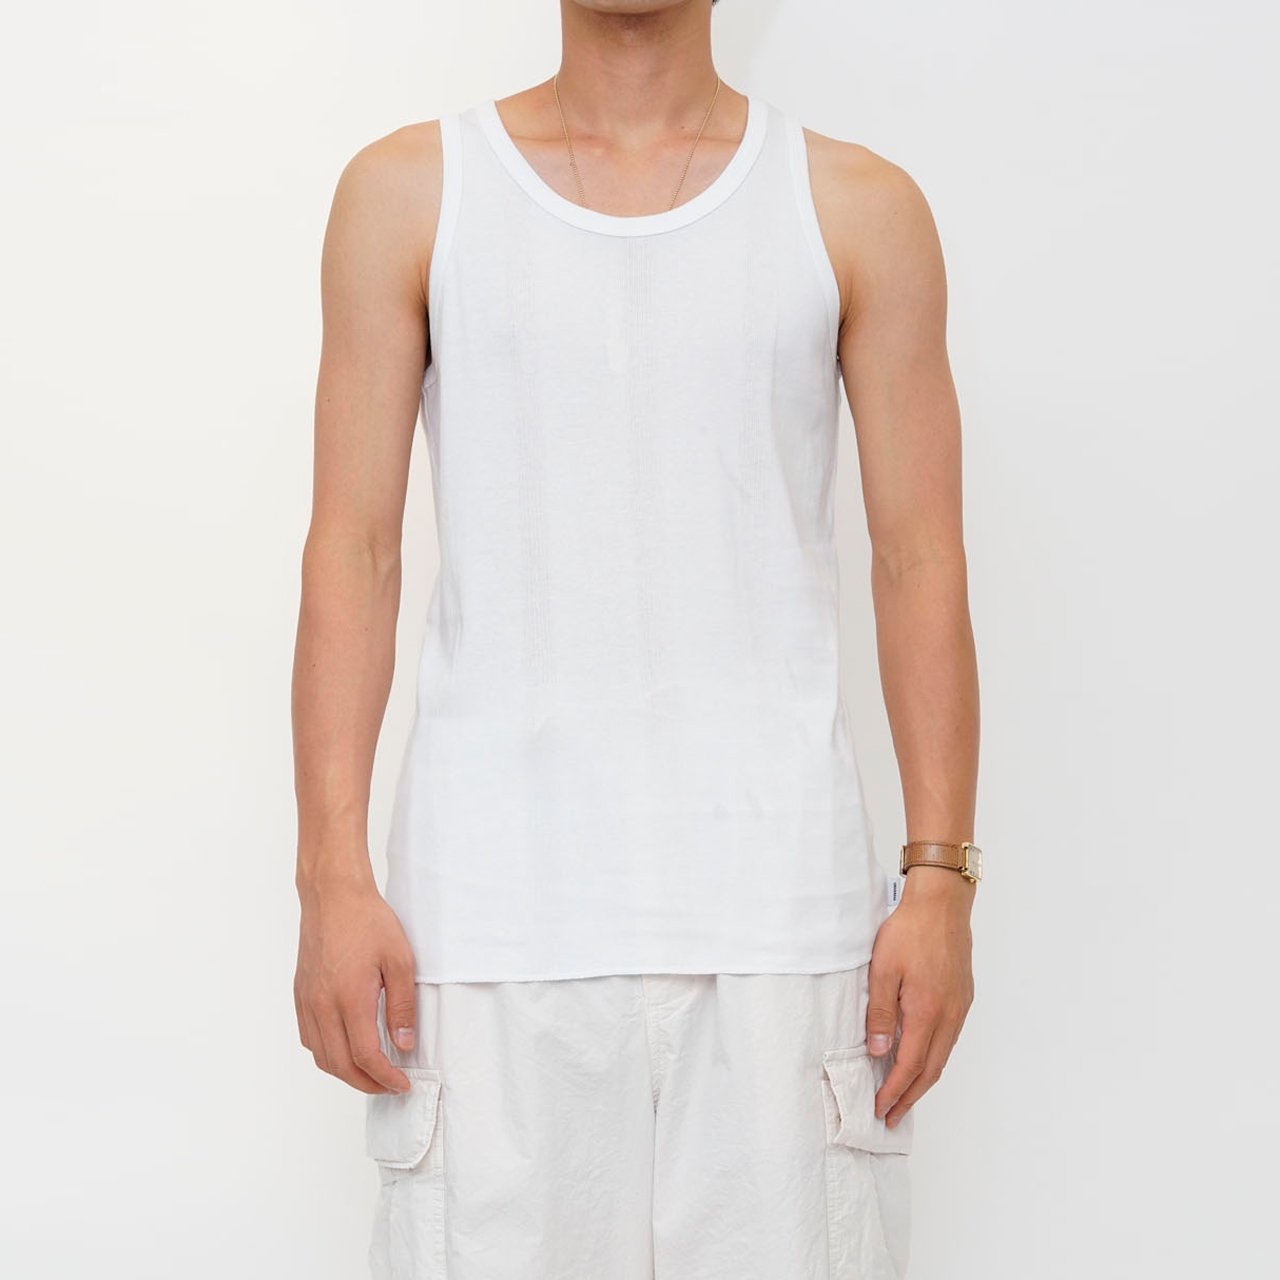 UNIVERSAL PRODUCTS (ユニバーサルプロダクツ)24SS/春夏
MILLER 2PAC TANK TOP WHITE